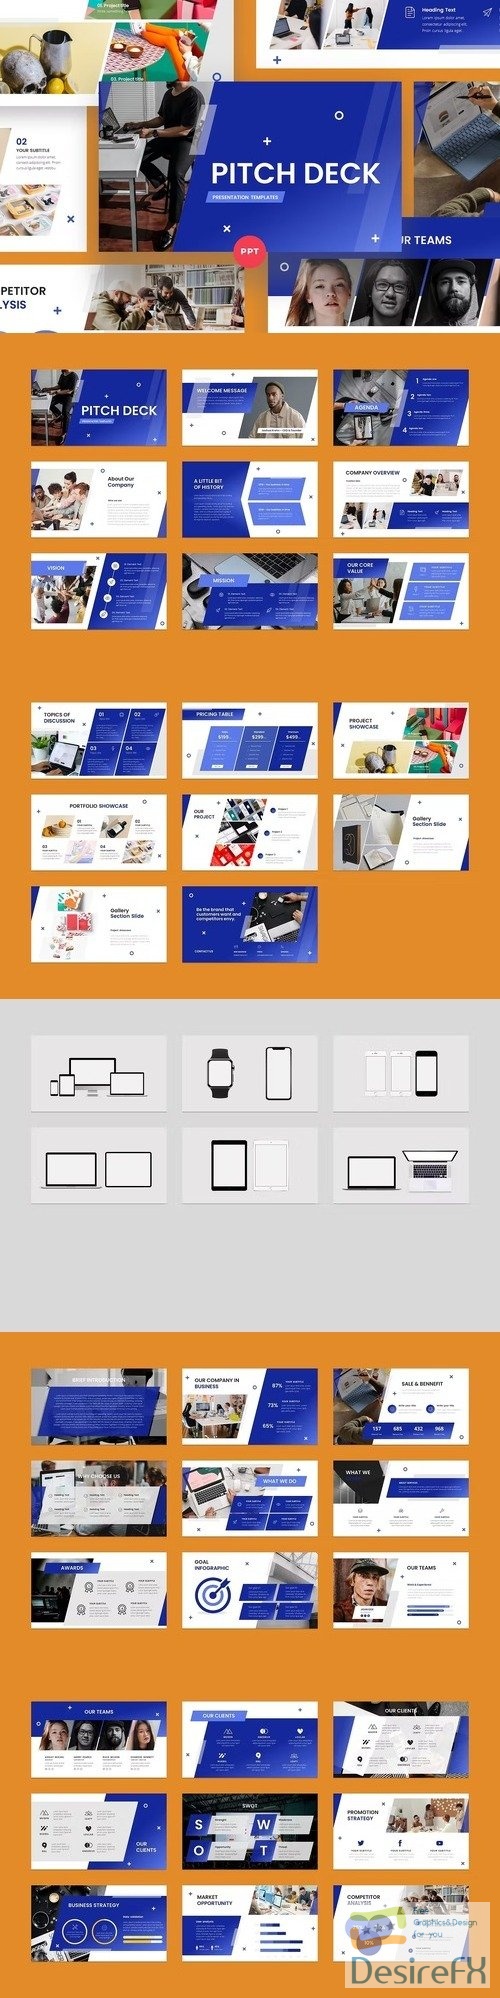 PITCH DECK PowerPoint Template